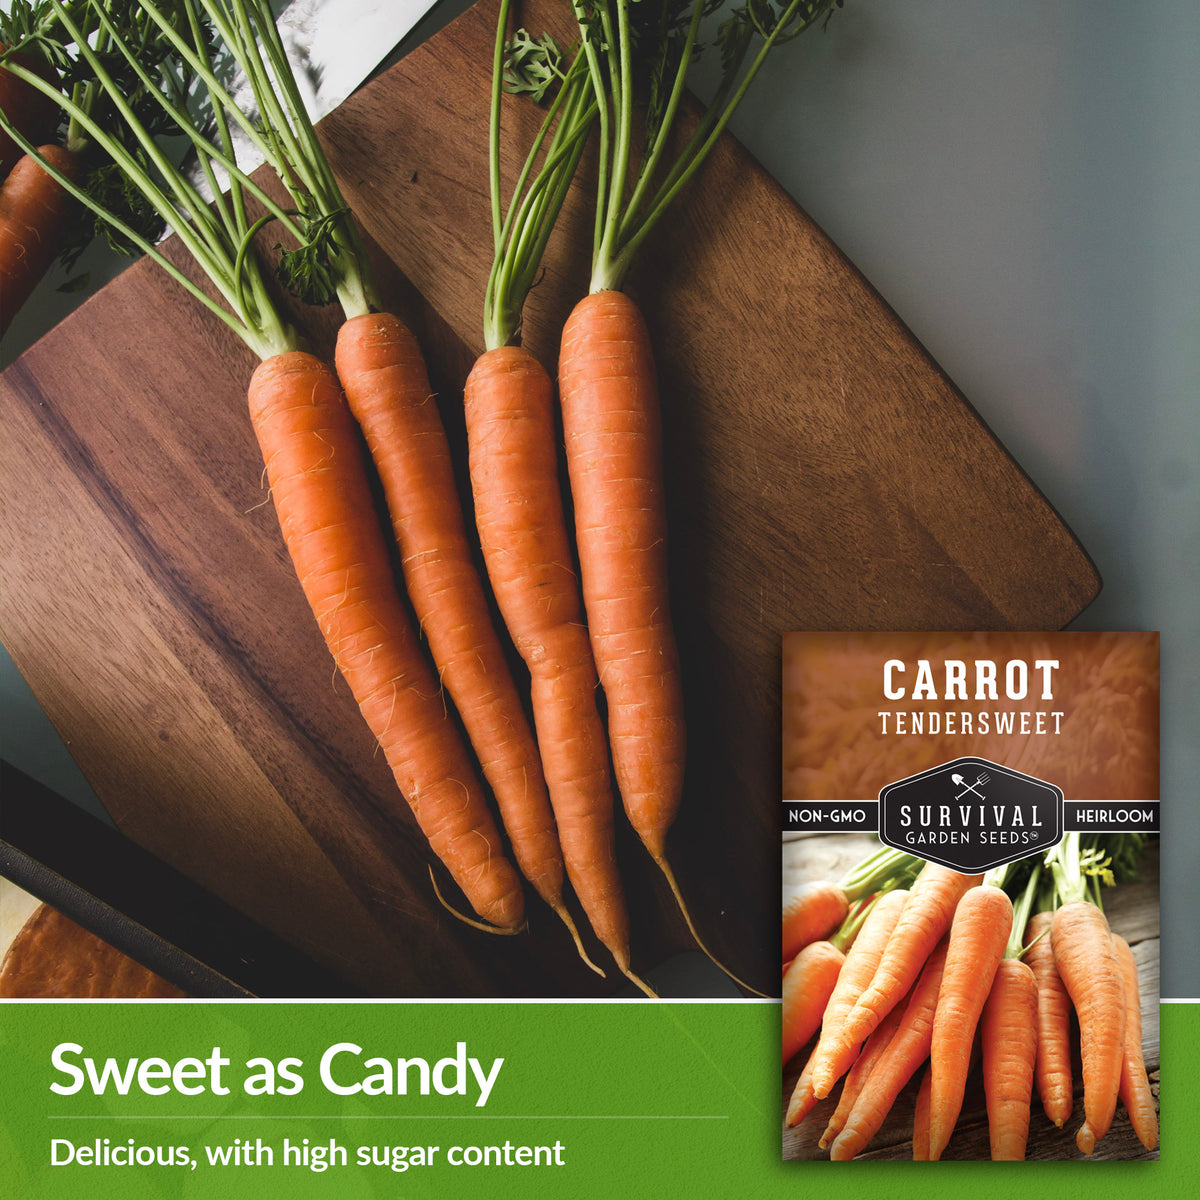 Tendersweet Carrots are delicious with a high sugar content